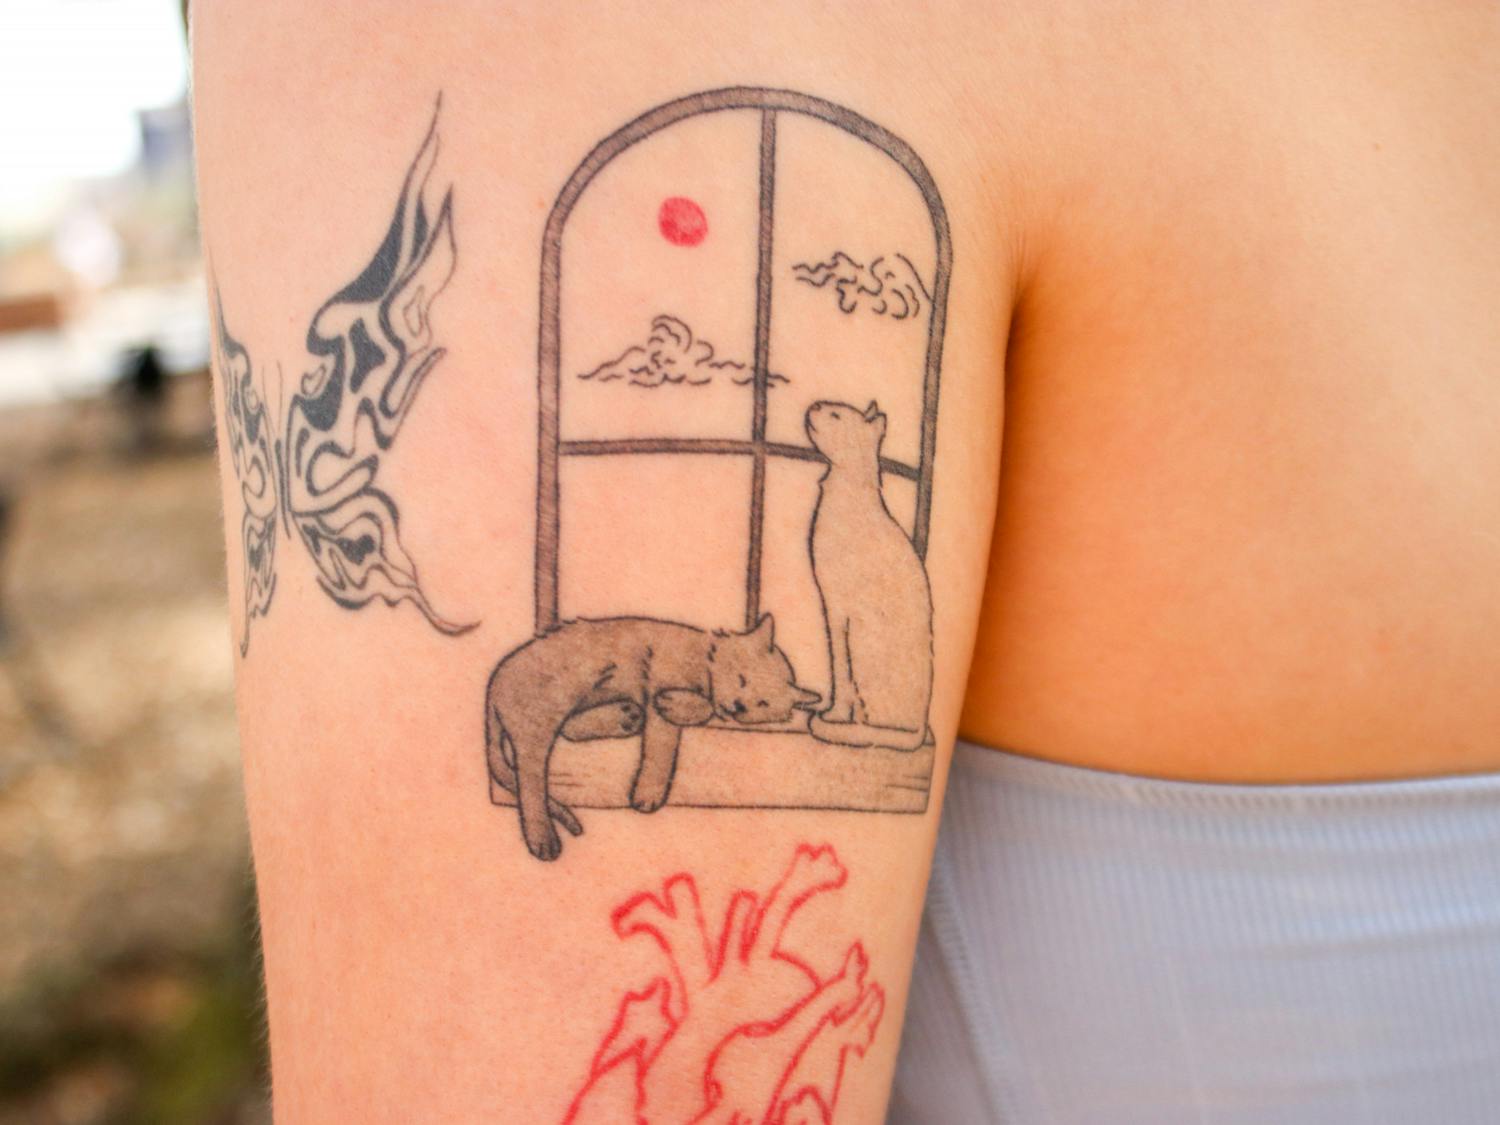 Sandford’s most recent tattoo is of her two cats, Max and Ruby. For her, this tattoo was an easy decision to make and an even easier one to fall in love with. “I just love it. It’s such a peaceful, simple part of joy that I get to have on me,” Sandford said.